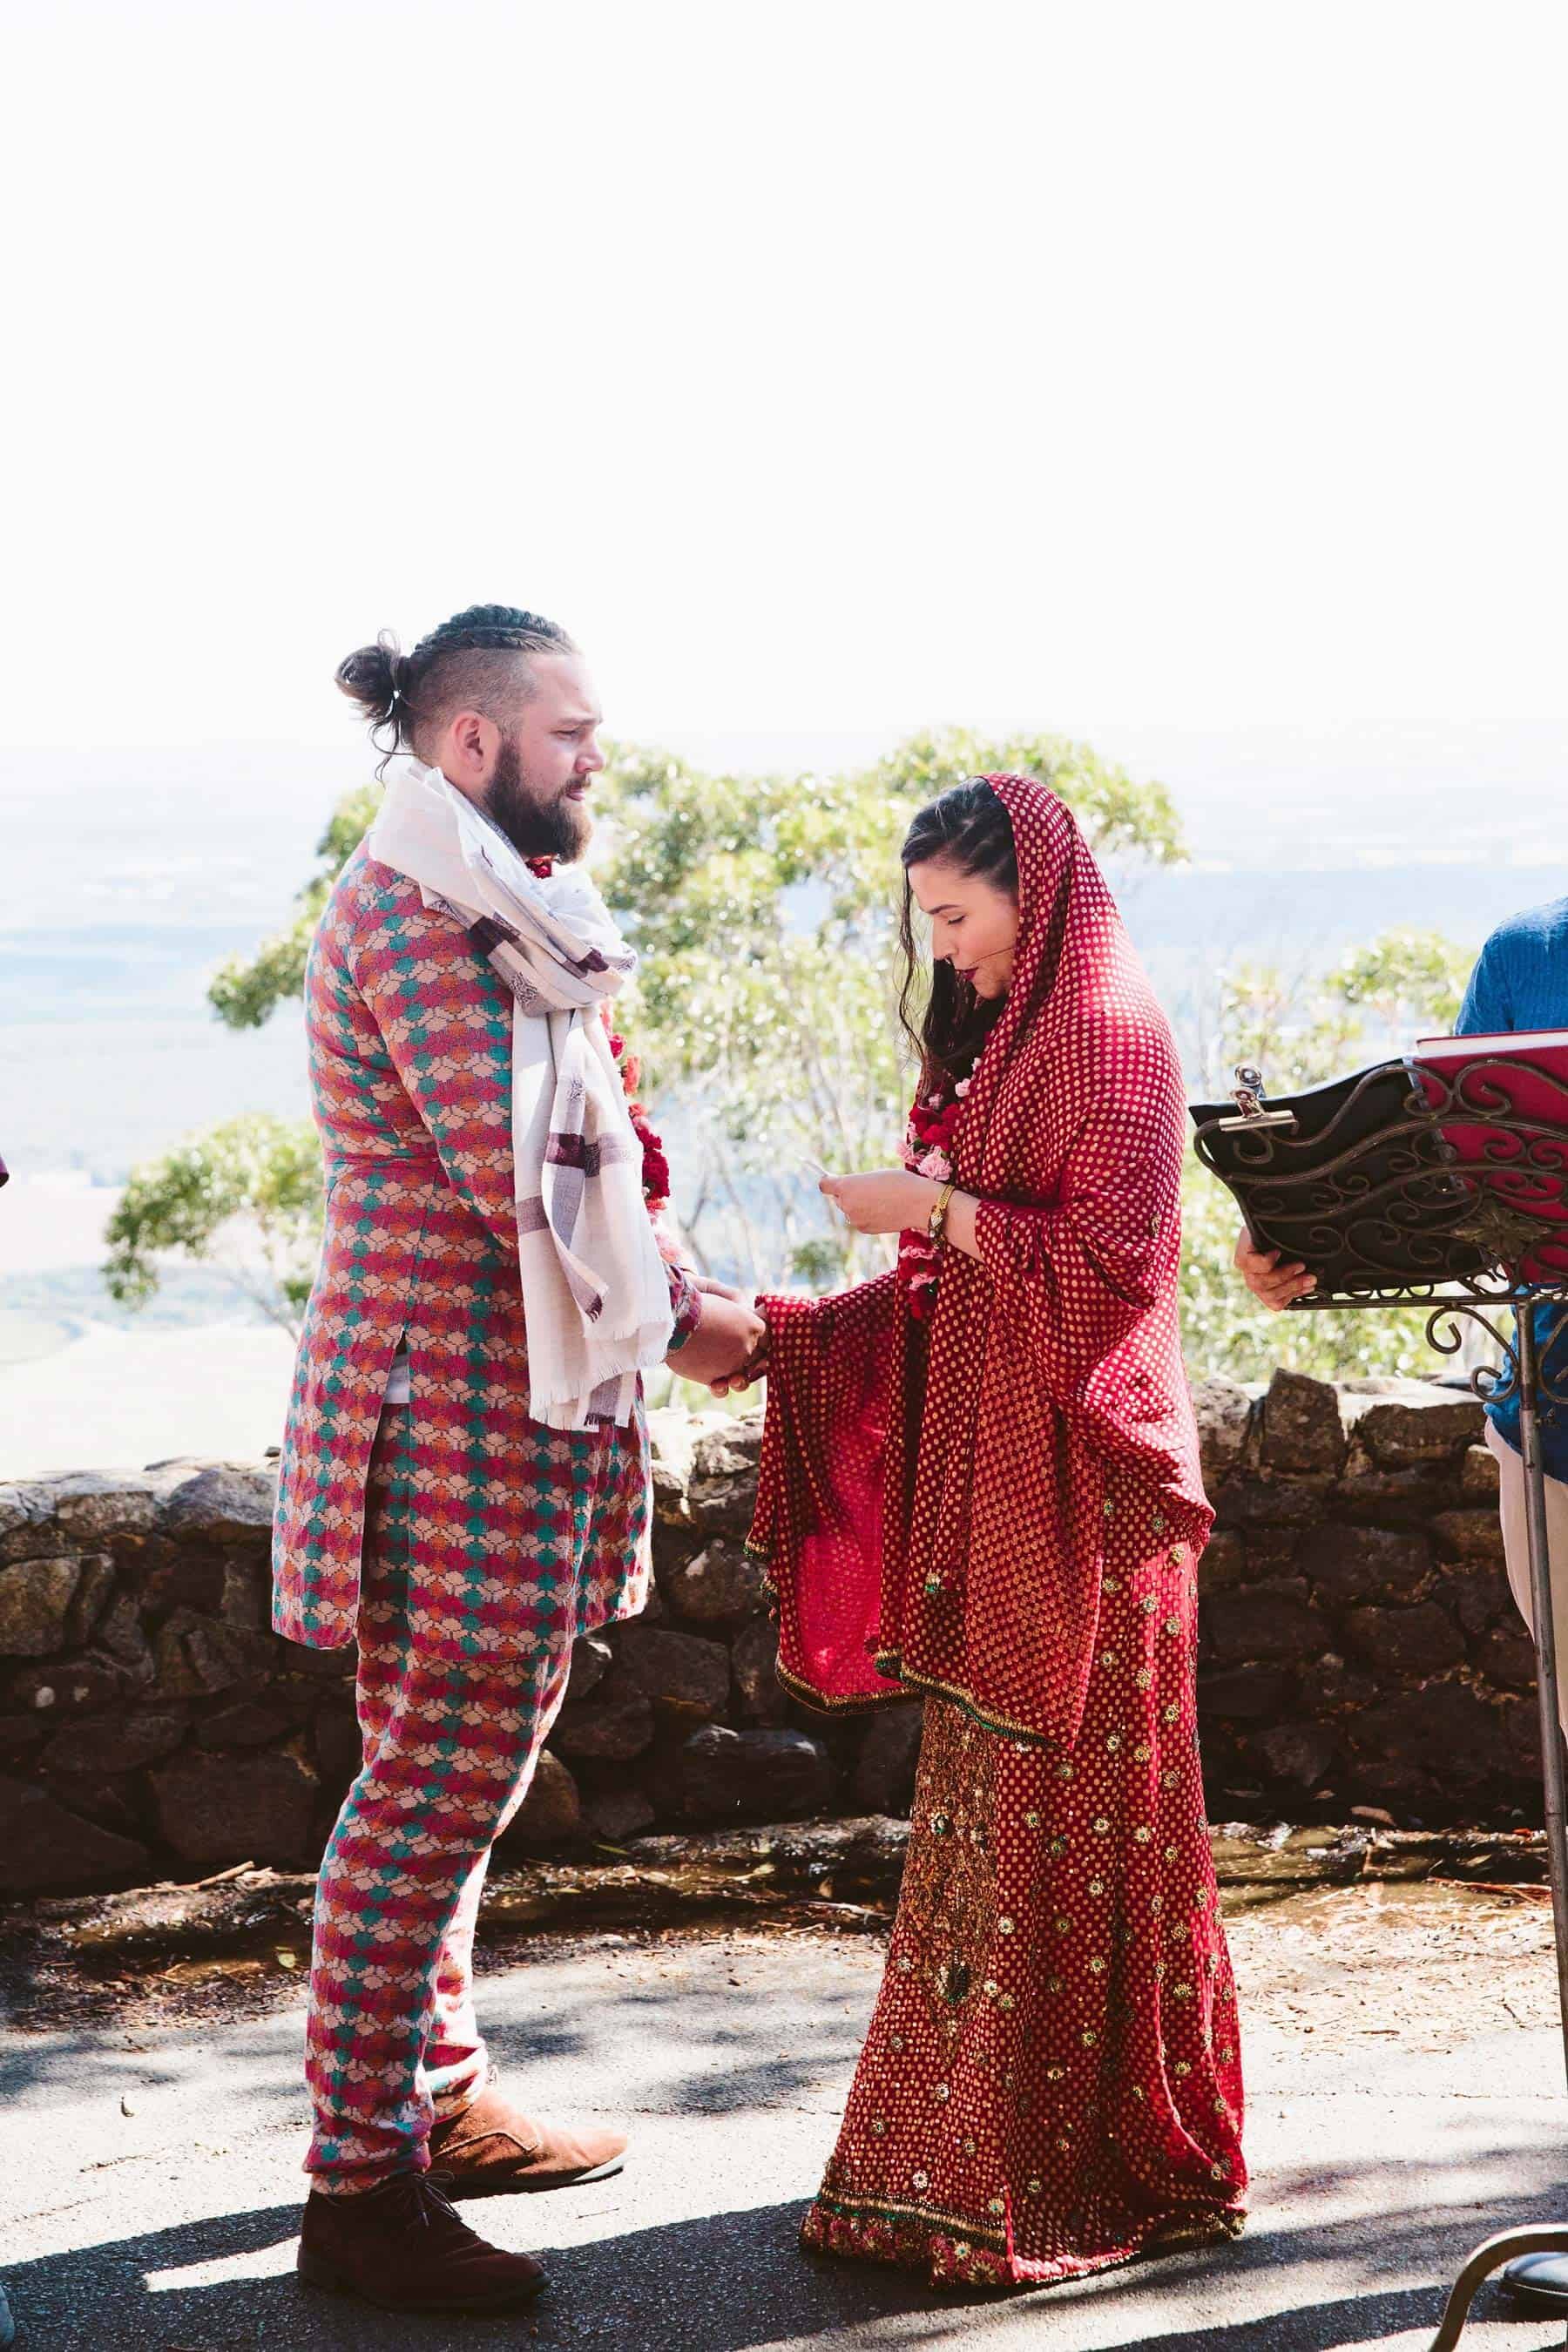 Boho bride and groom in Indian dress